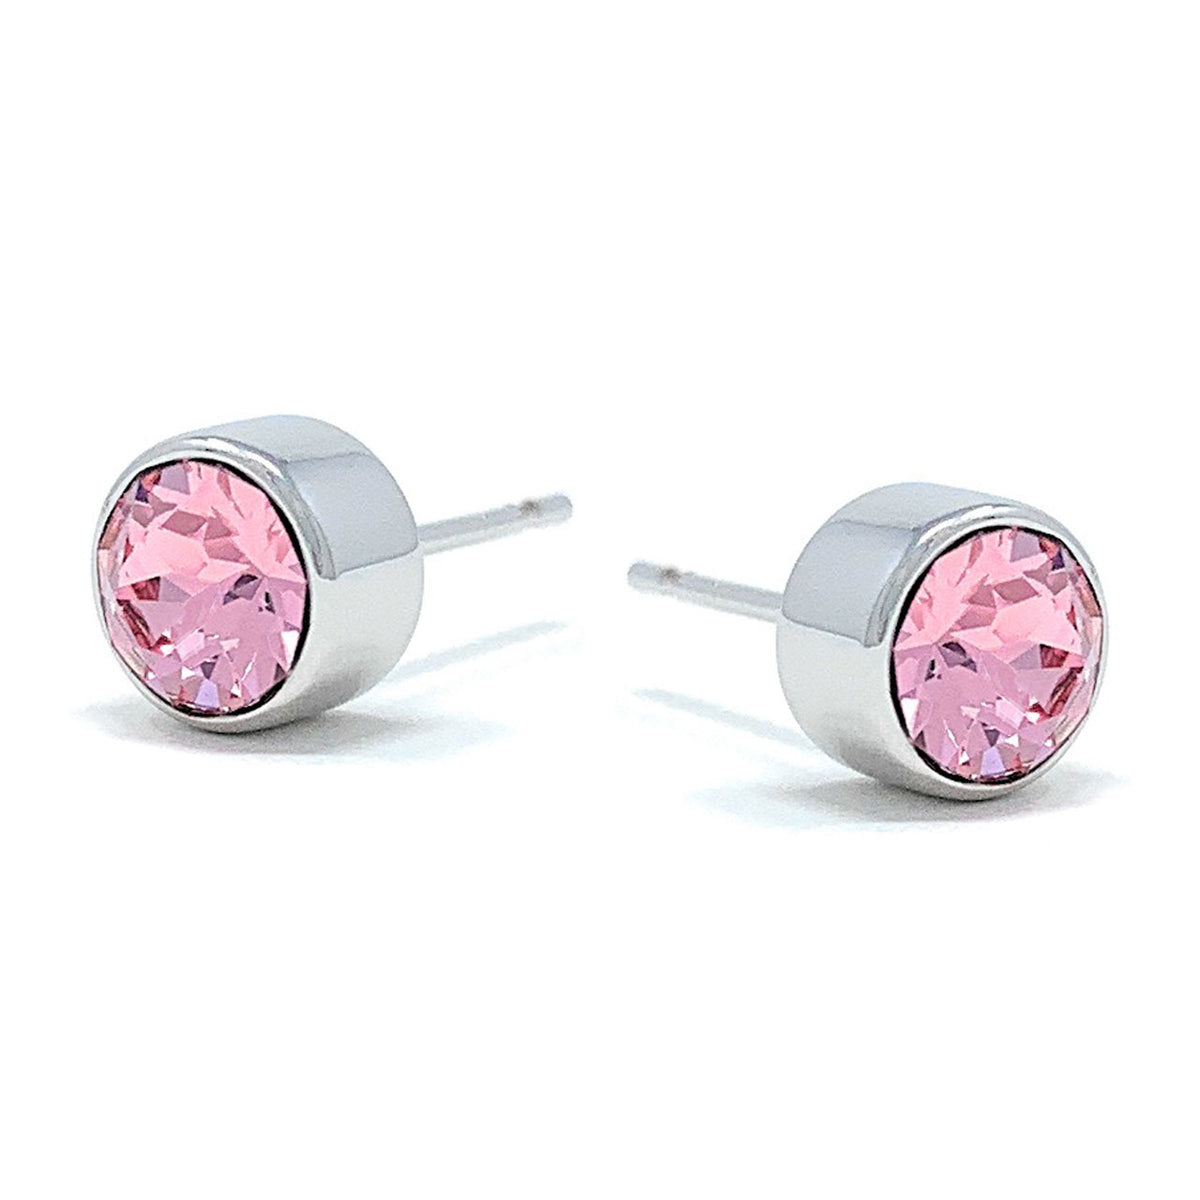 Harley Small Stud Earrings with Pink Light Rose Round Crystals from Swarovski Silver Toned Rhodium Plated - Ed Heart